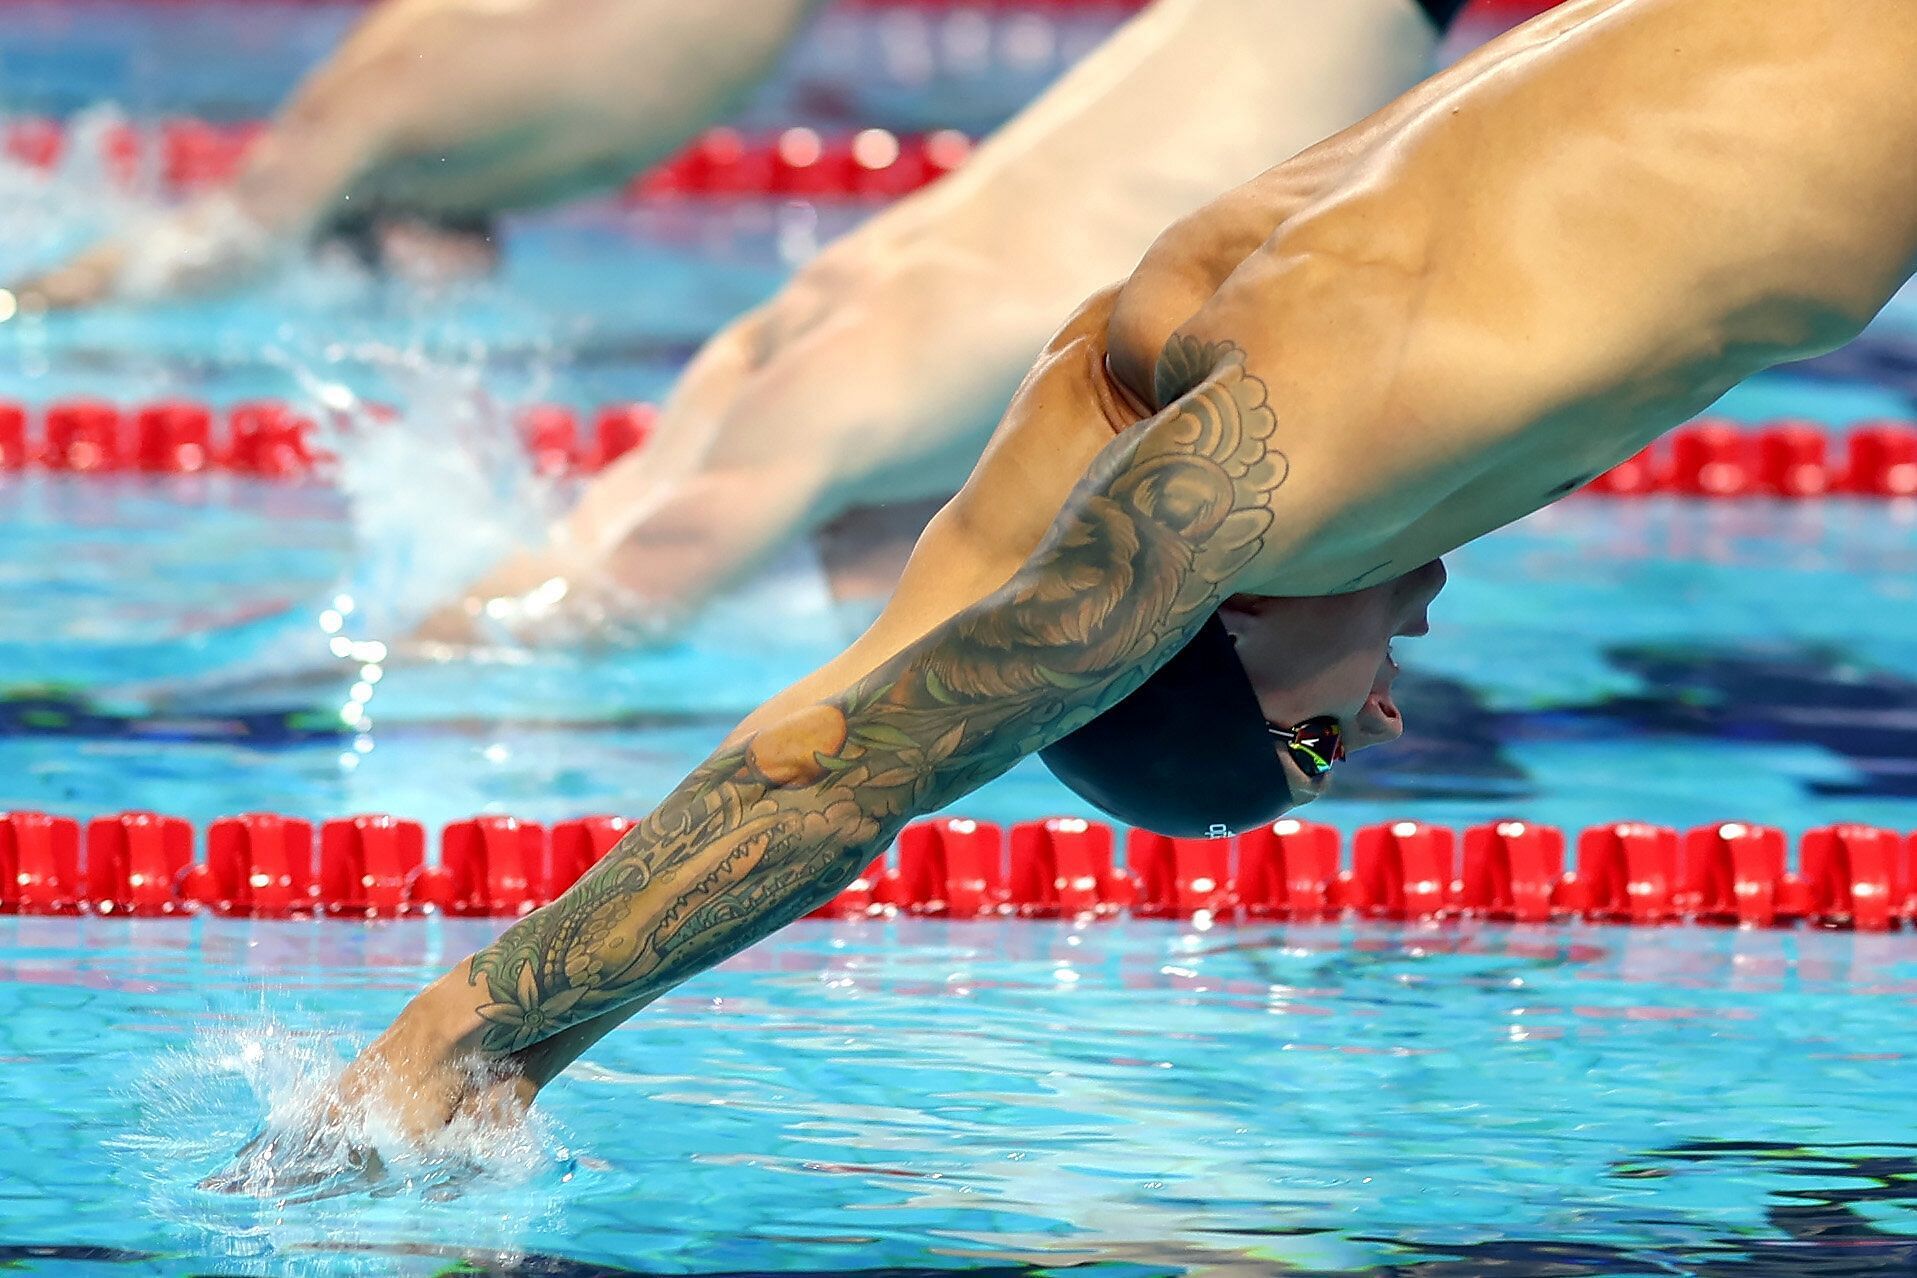 The American Olympic Swimmer performing in a competition